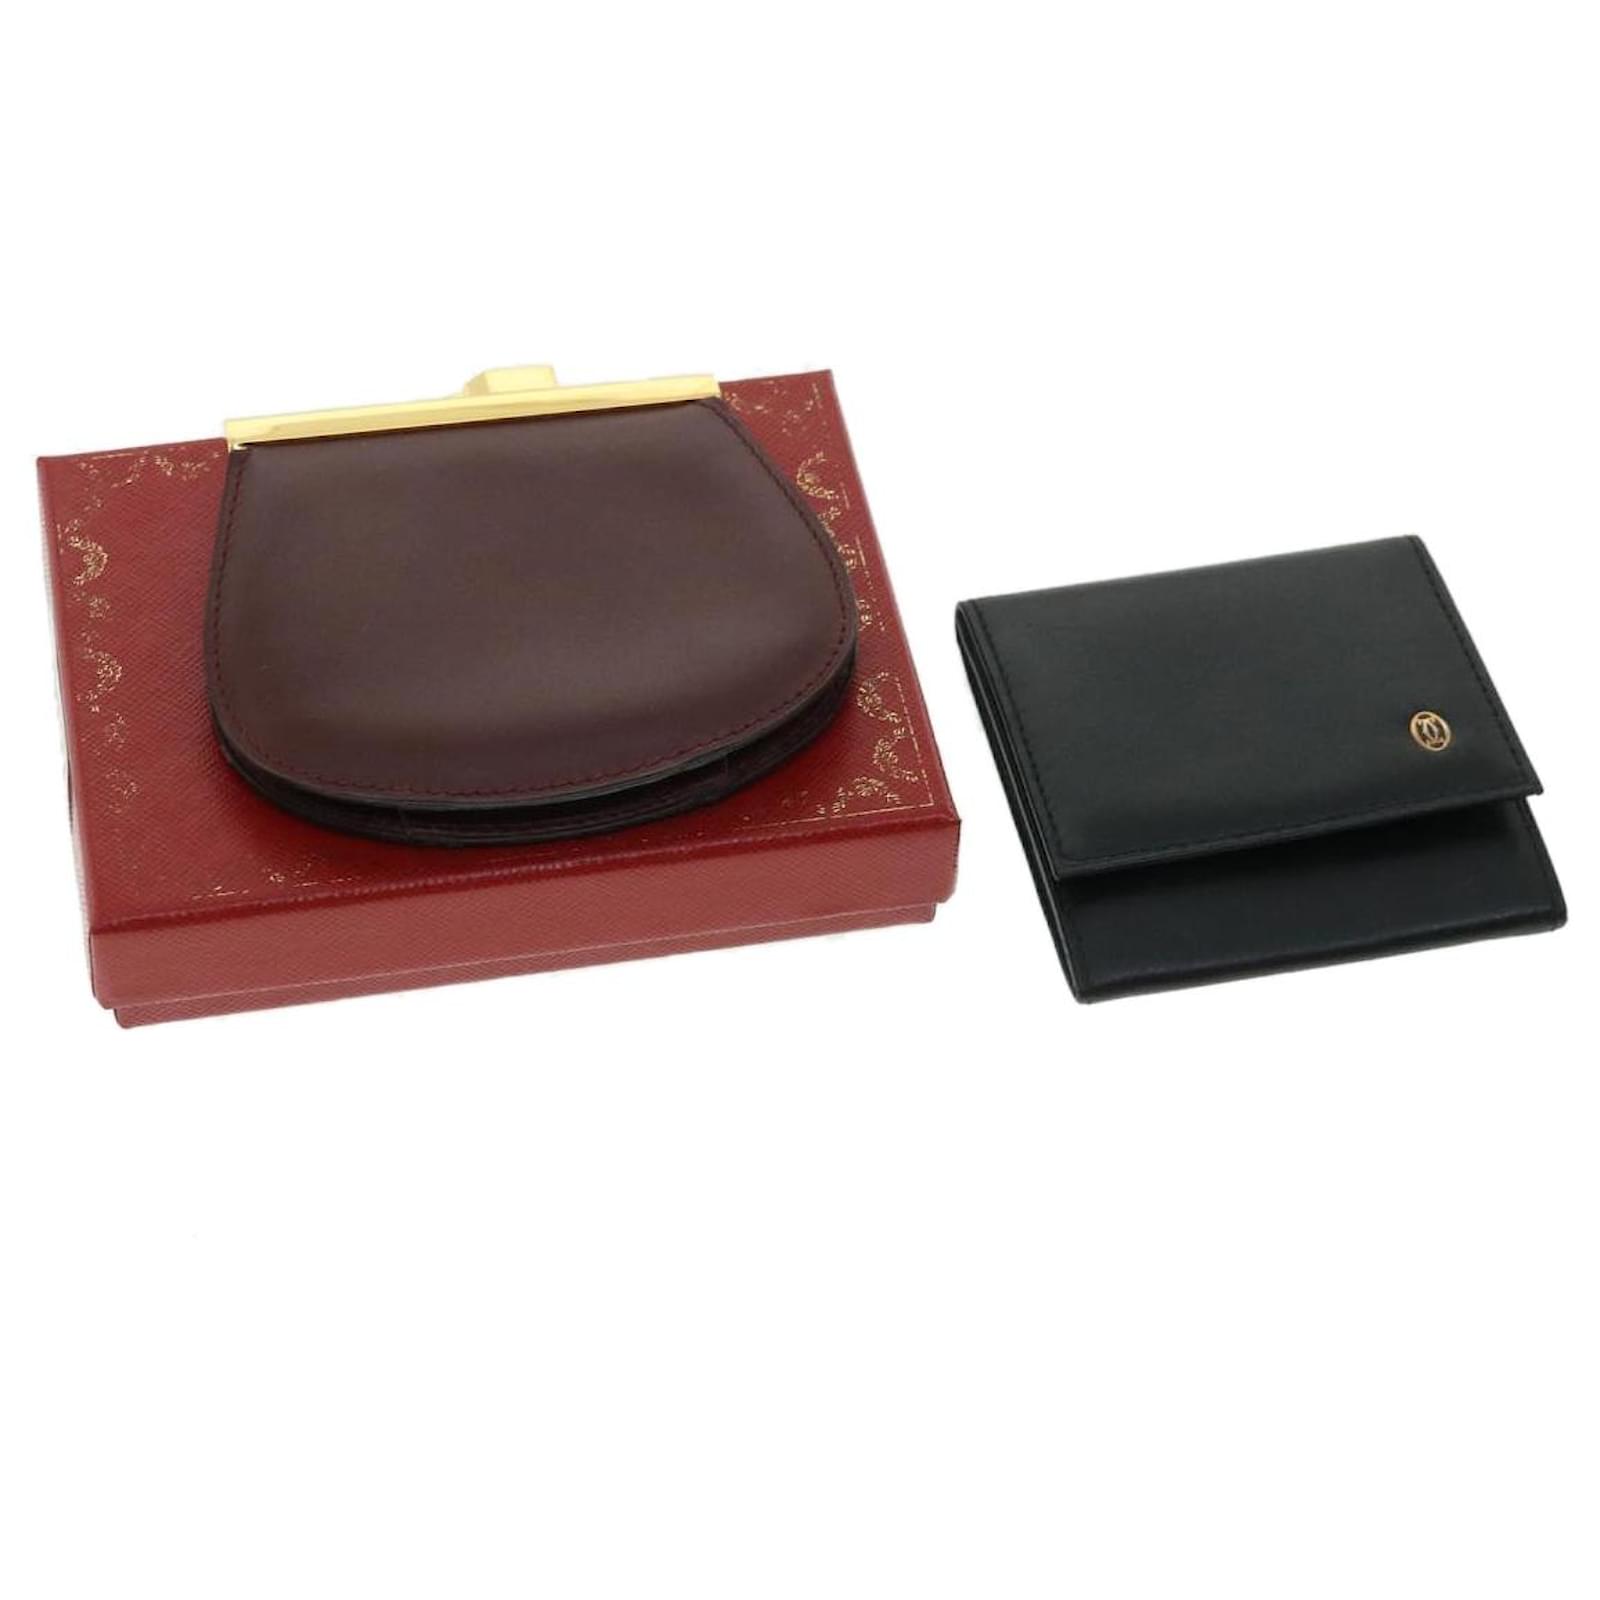 Authentic Vintage Cartier Burgundy Leather Unique Small Coin Purse / Pouch  | Small coin purse, Vintage cartier, Purse pouch